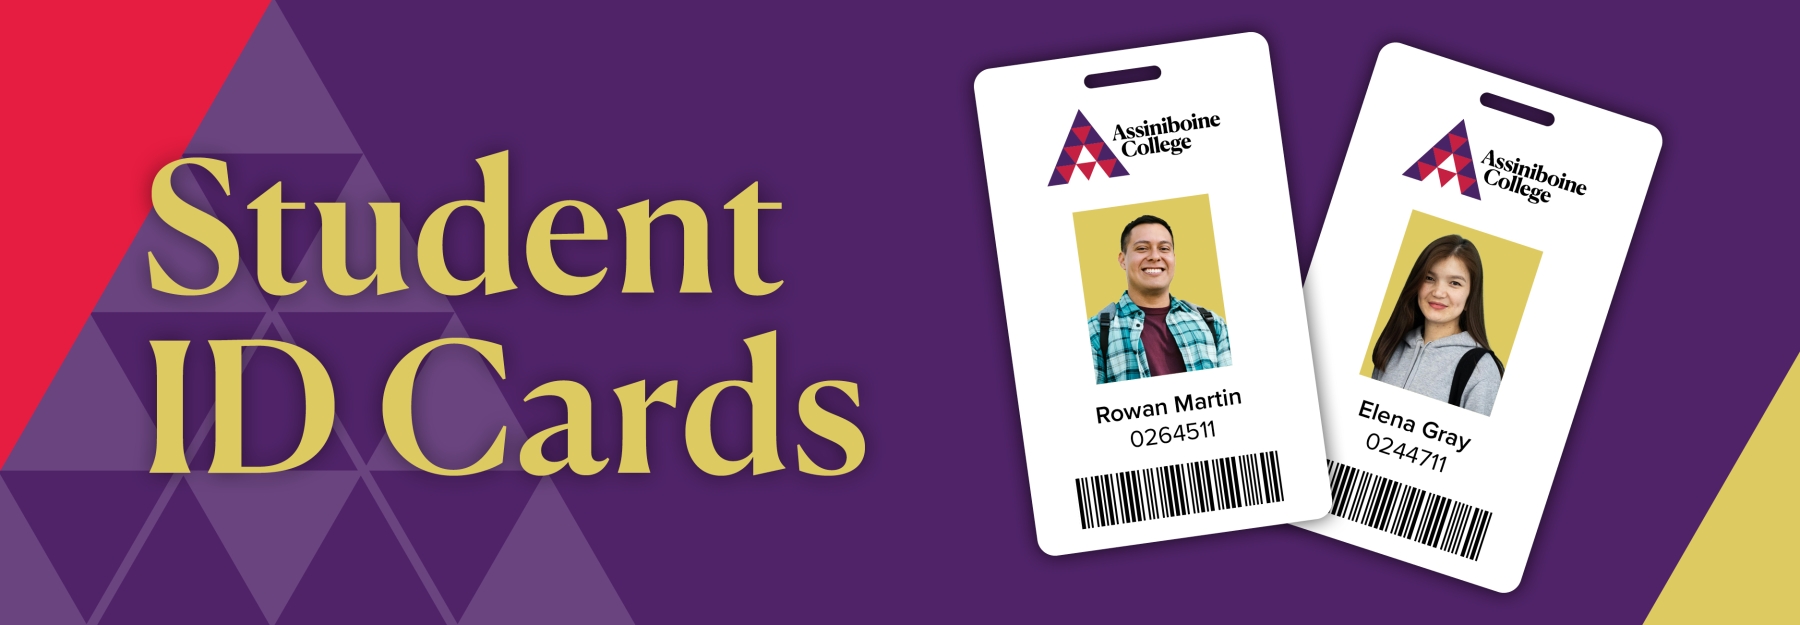 "Student ID cards" written in yellow over the left side of the picture, and two student ID cards on the right side of the picture, all on purple background.